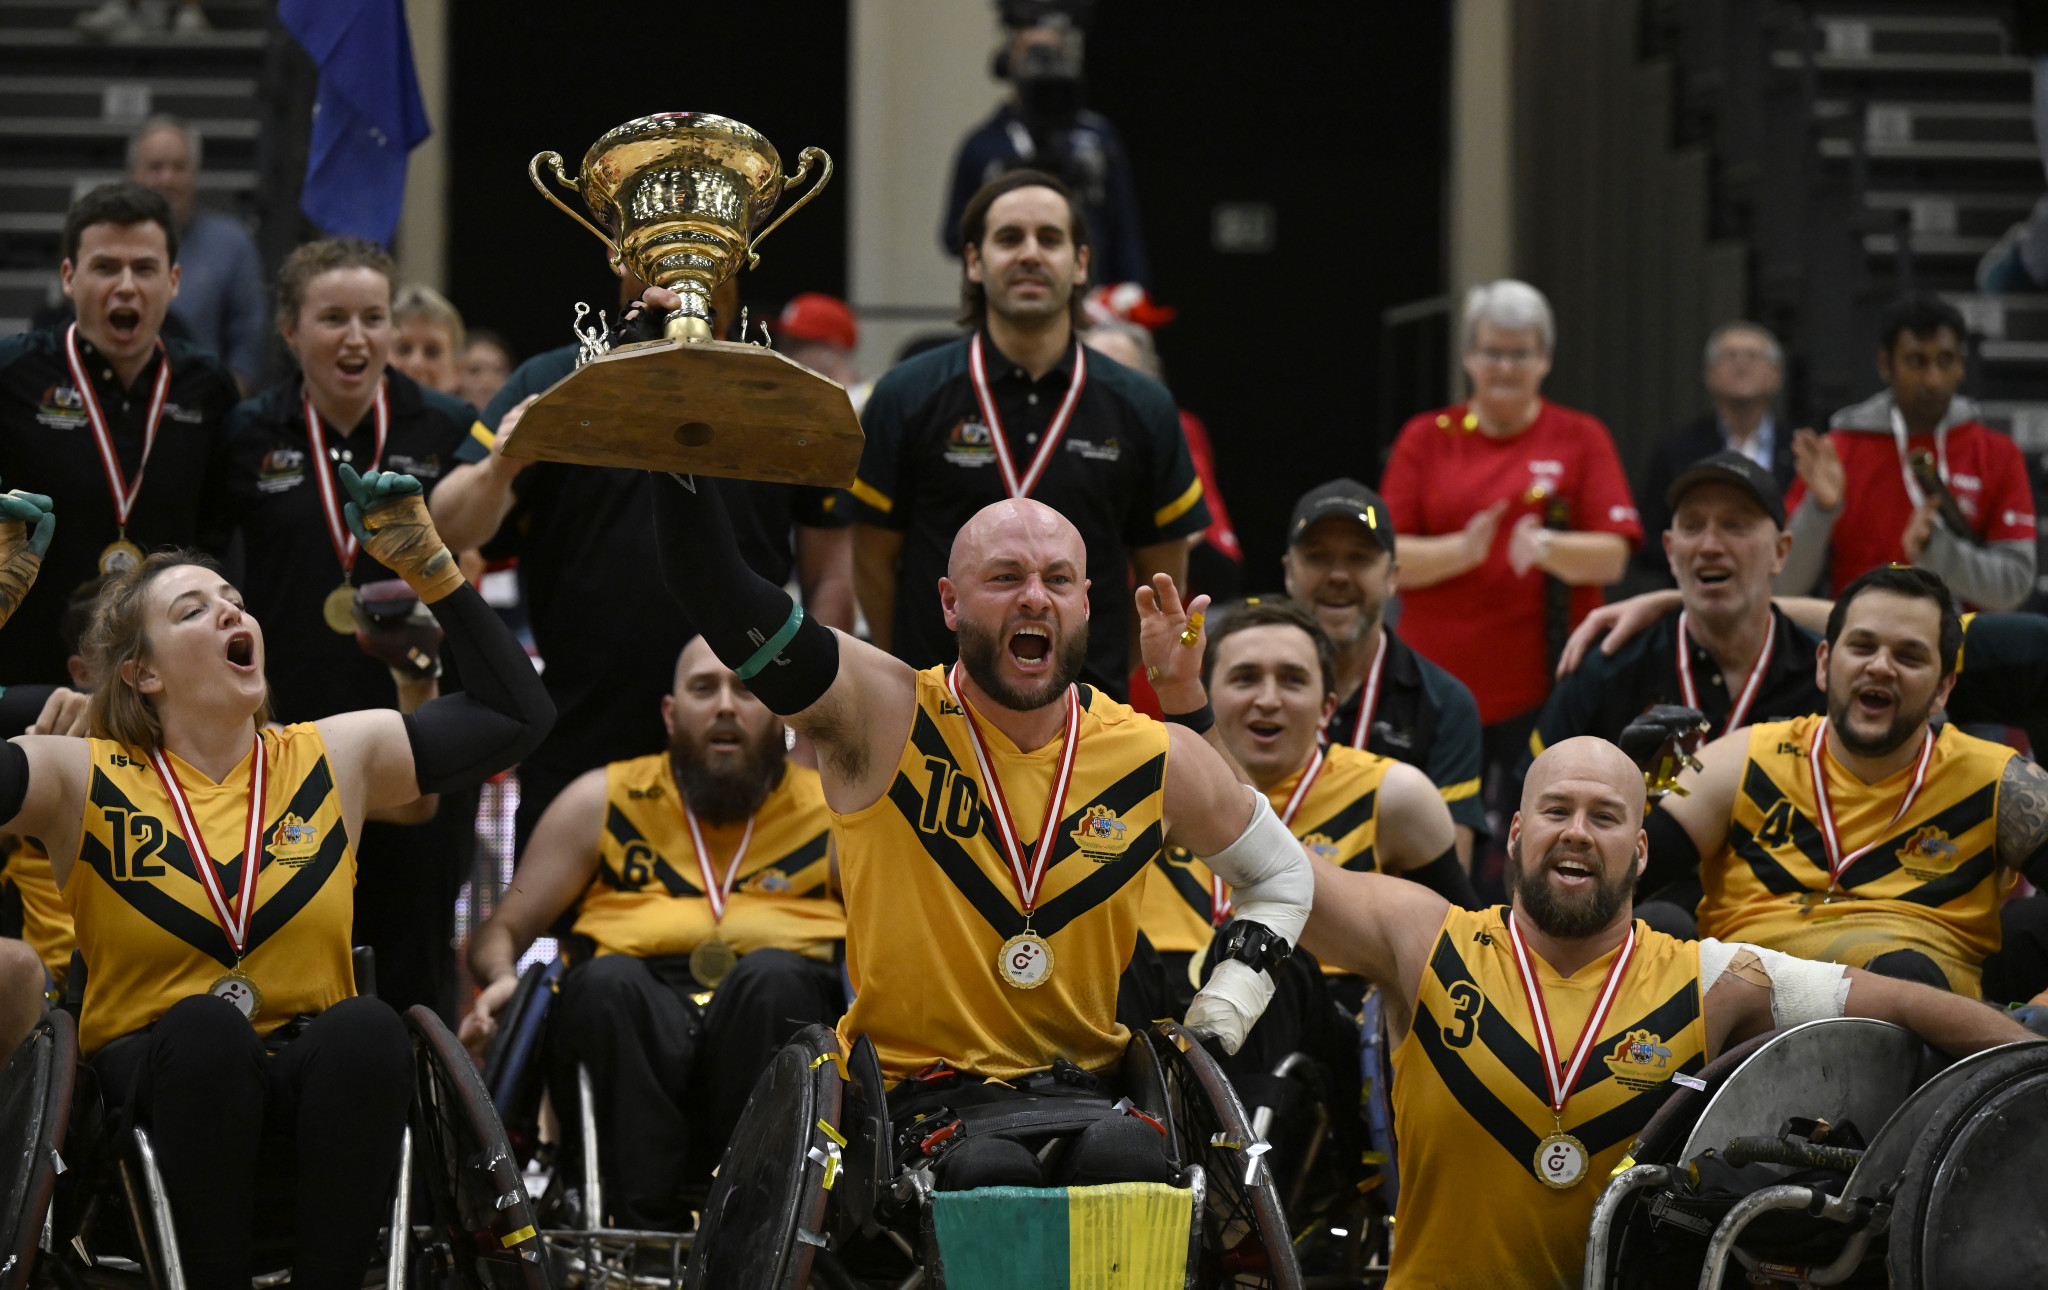 Australia taste gold at World Wheelchair Rugby Championship in Vejle